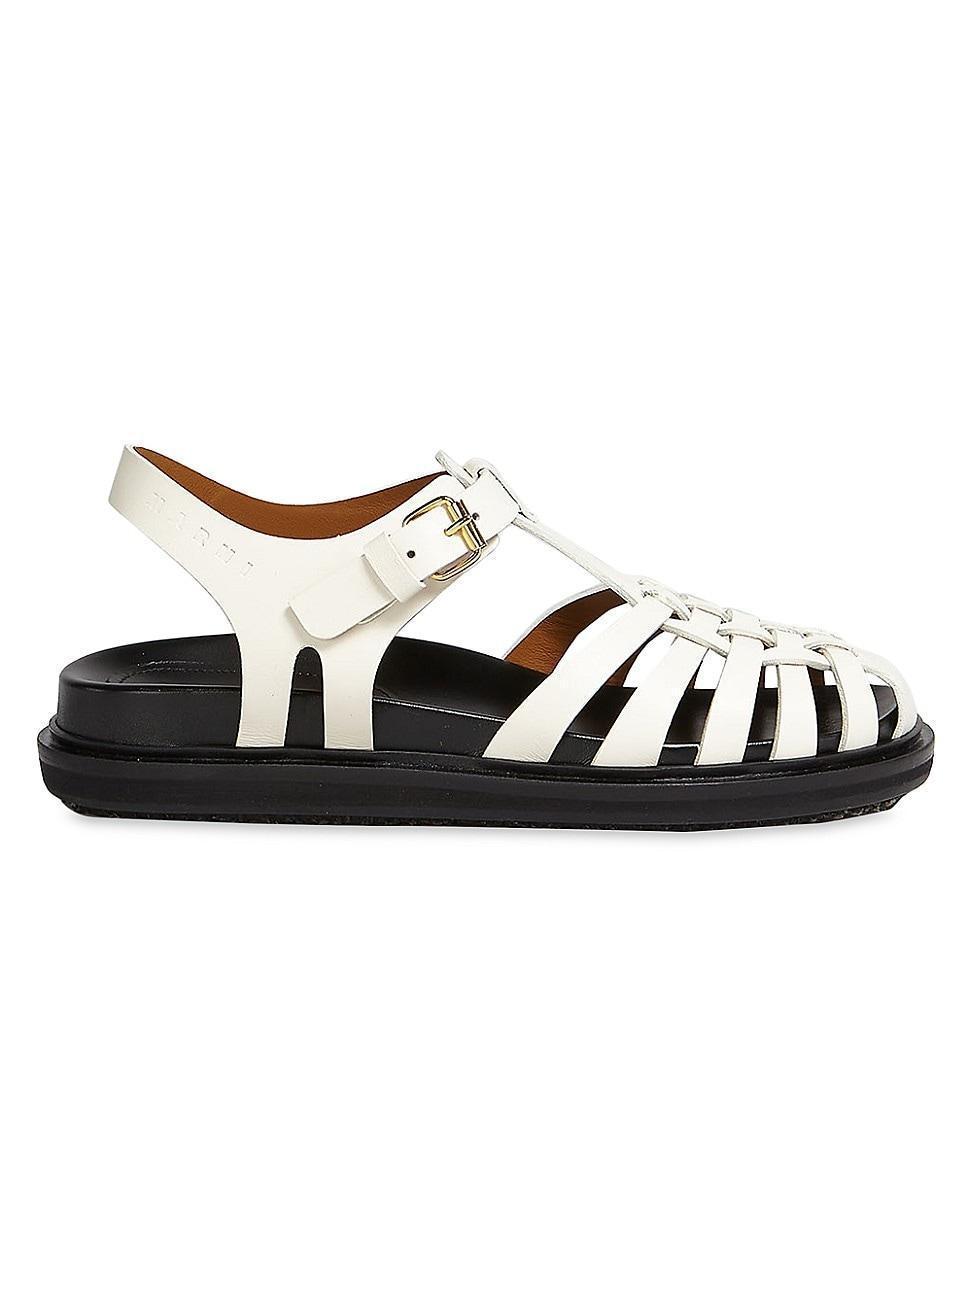 Womens Leather Fisherman Sandals - Stone White - Size 6.5 Product Image